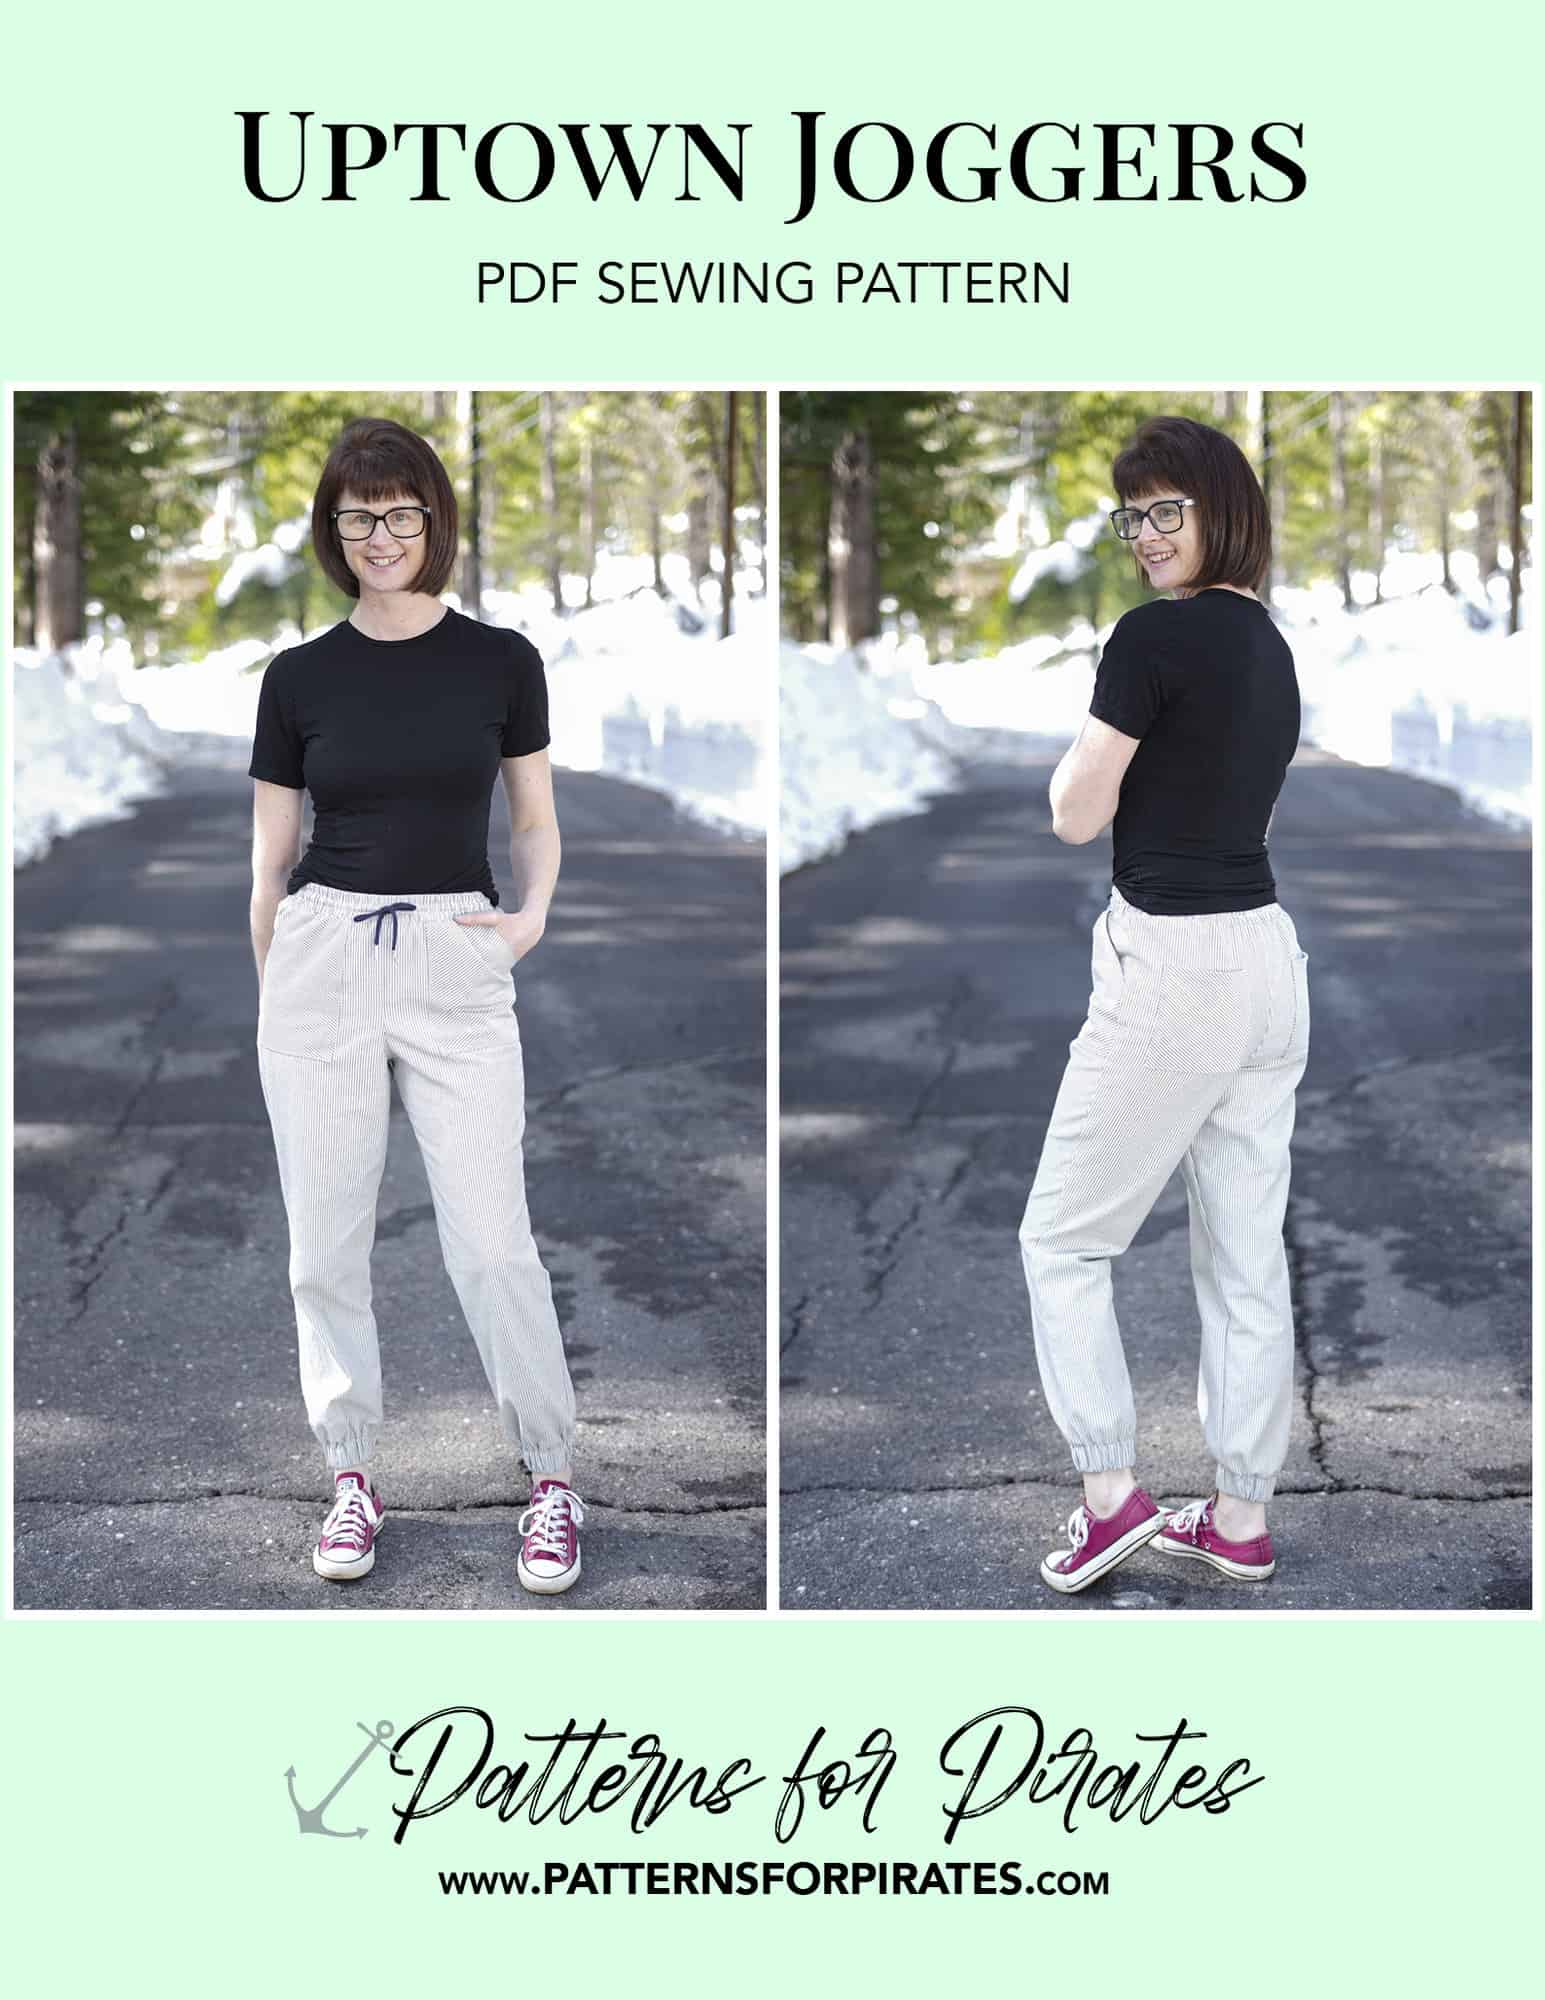 Uptown Joggers - Patterns for Pirates